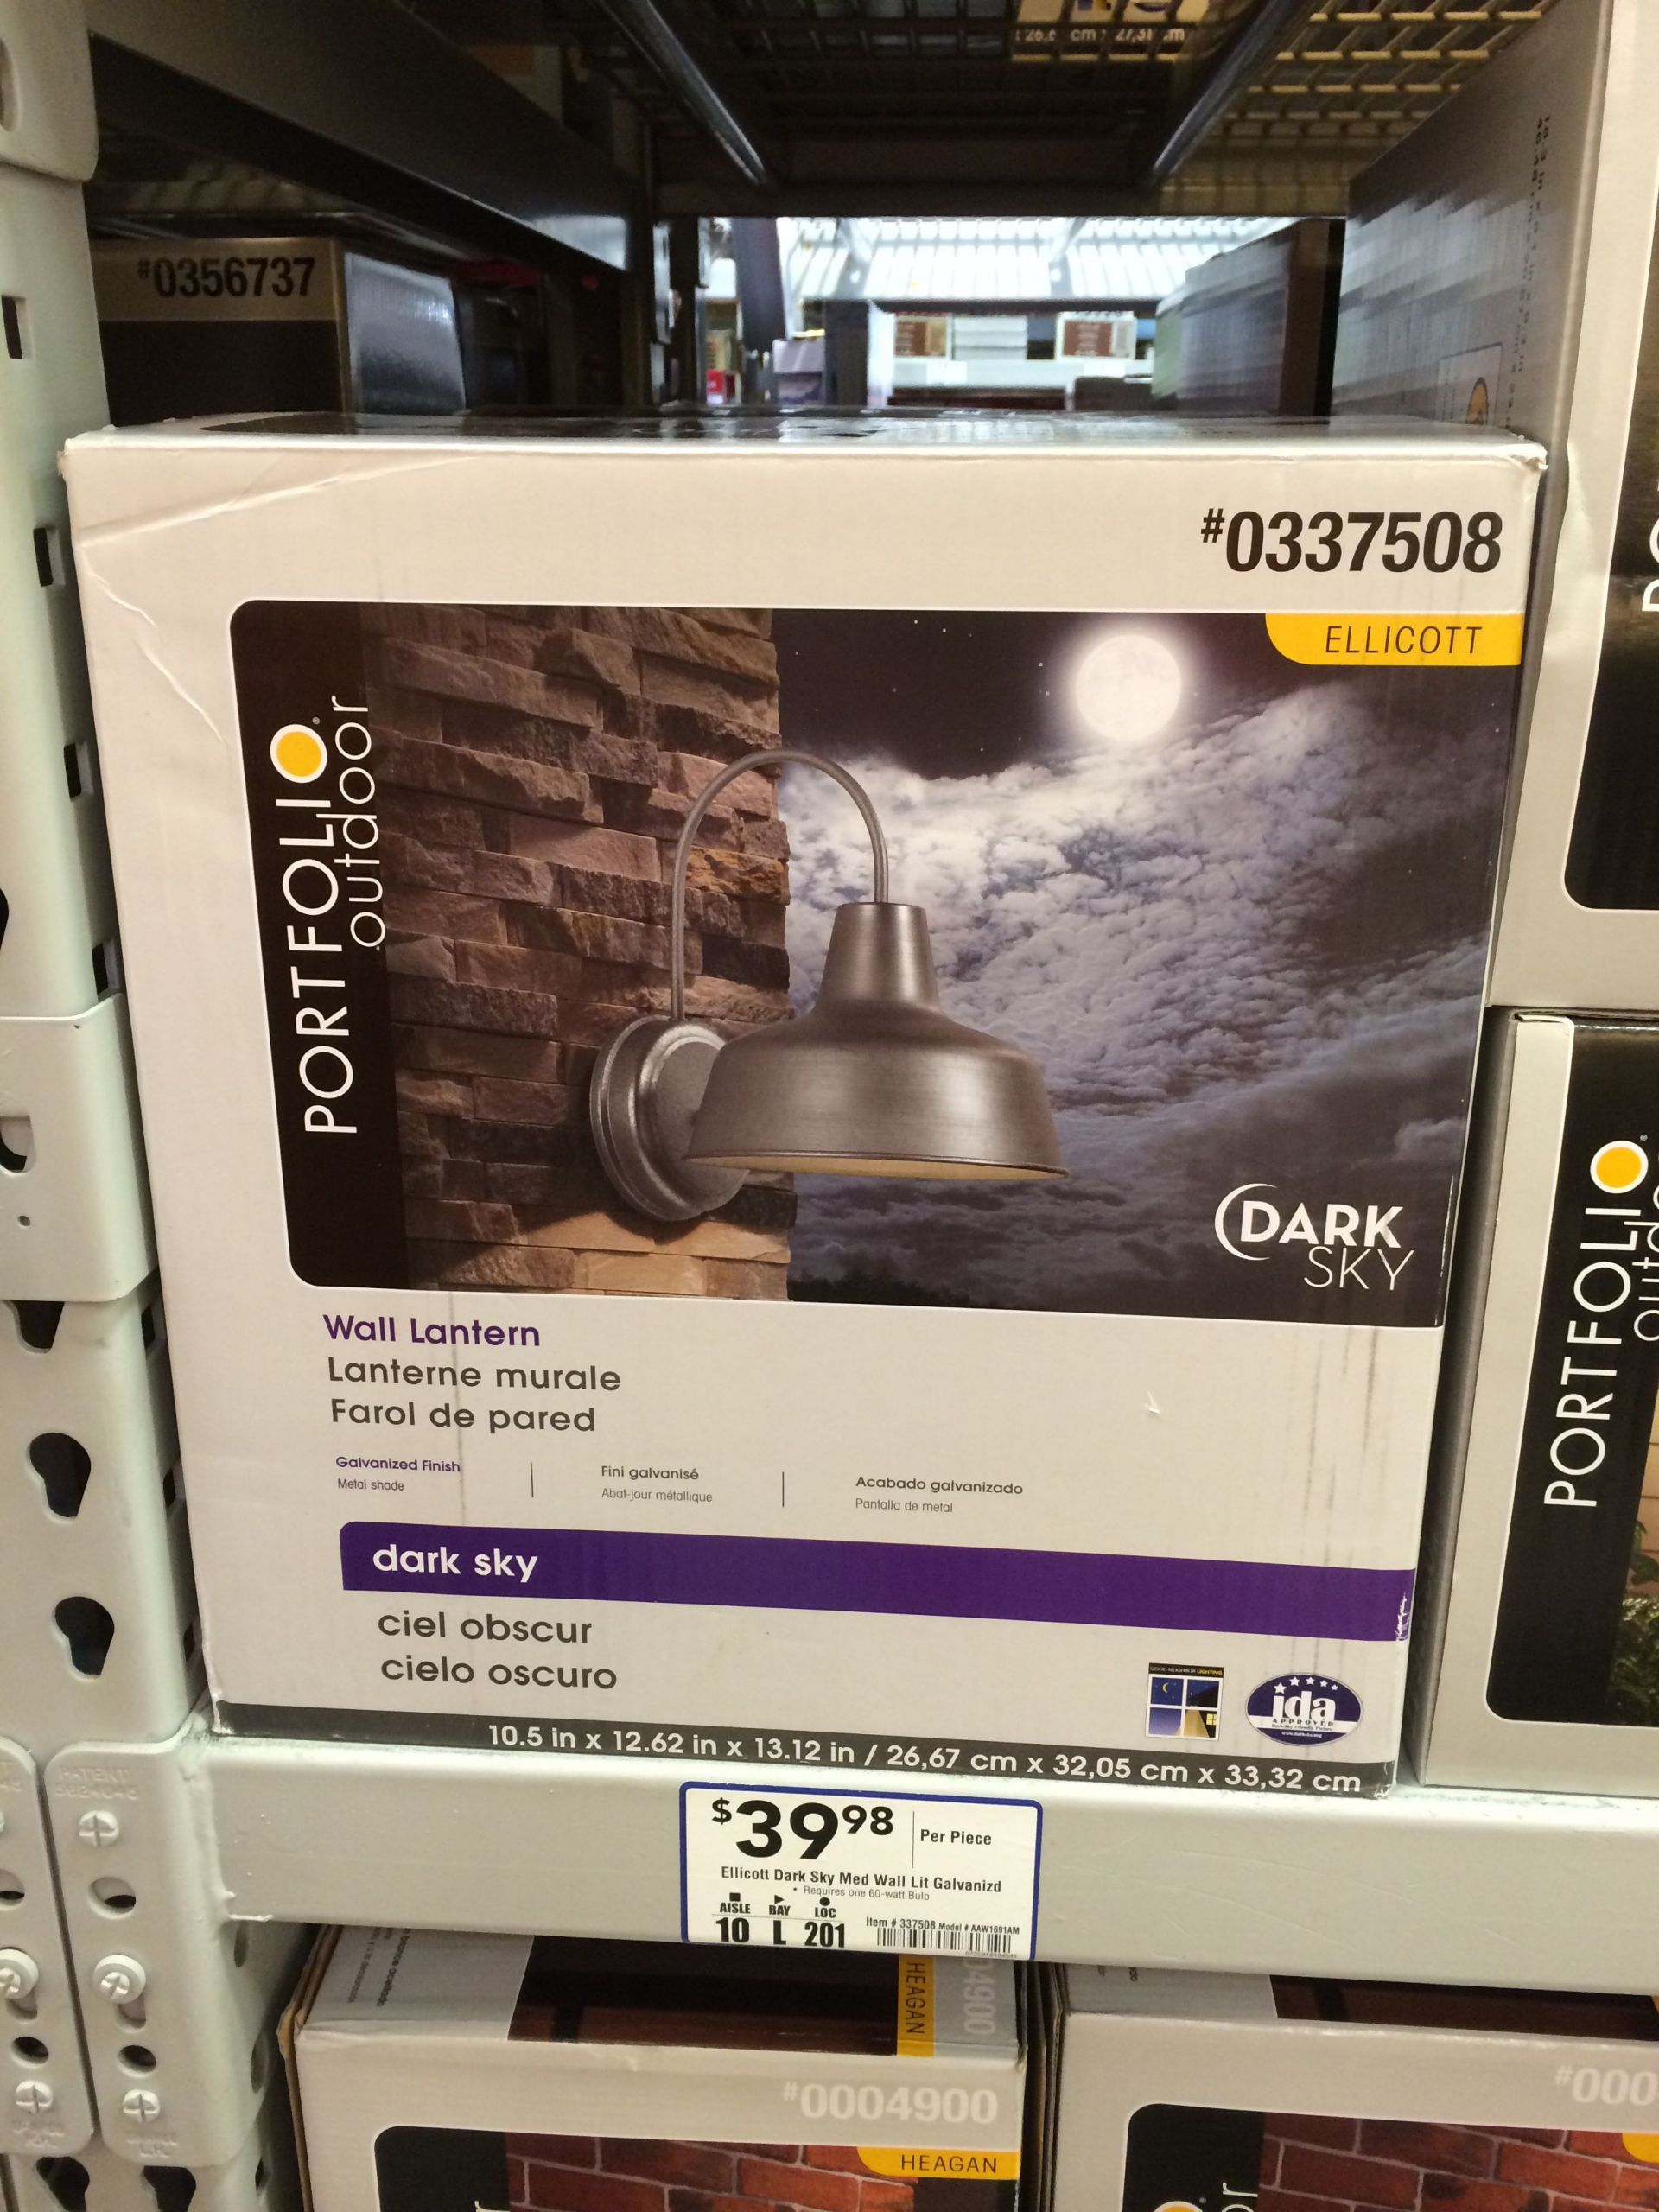 Lowes Kitchen Lights Over Sink
 Lowes barn light for over my kitchen sink $39 98 Love